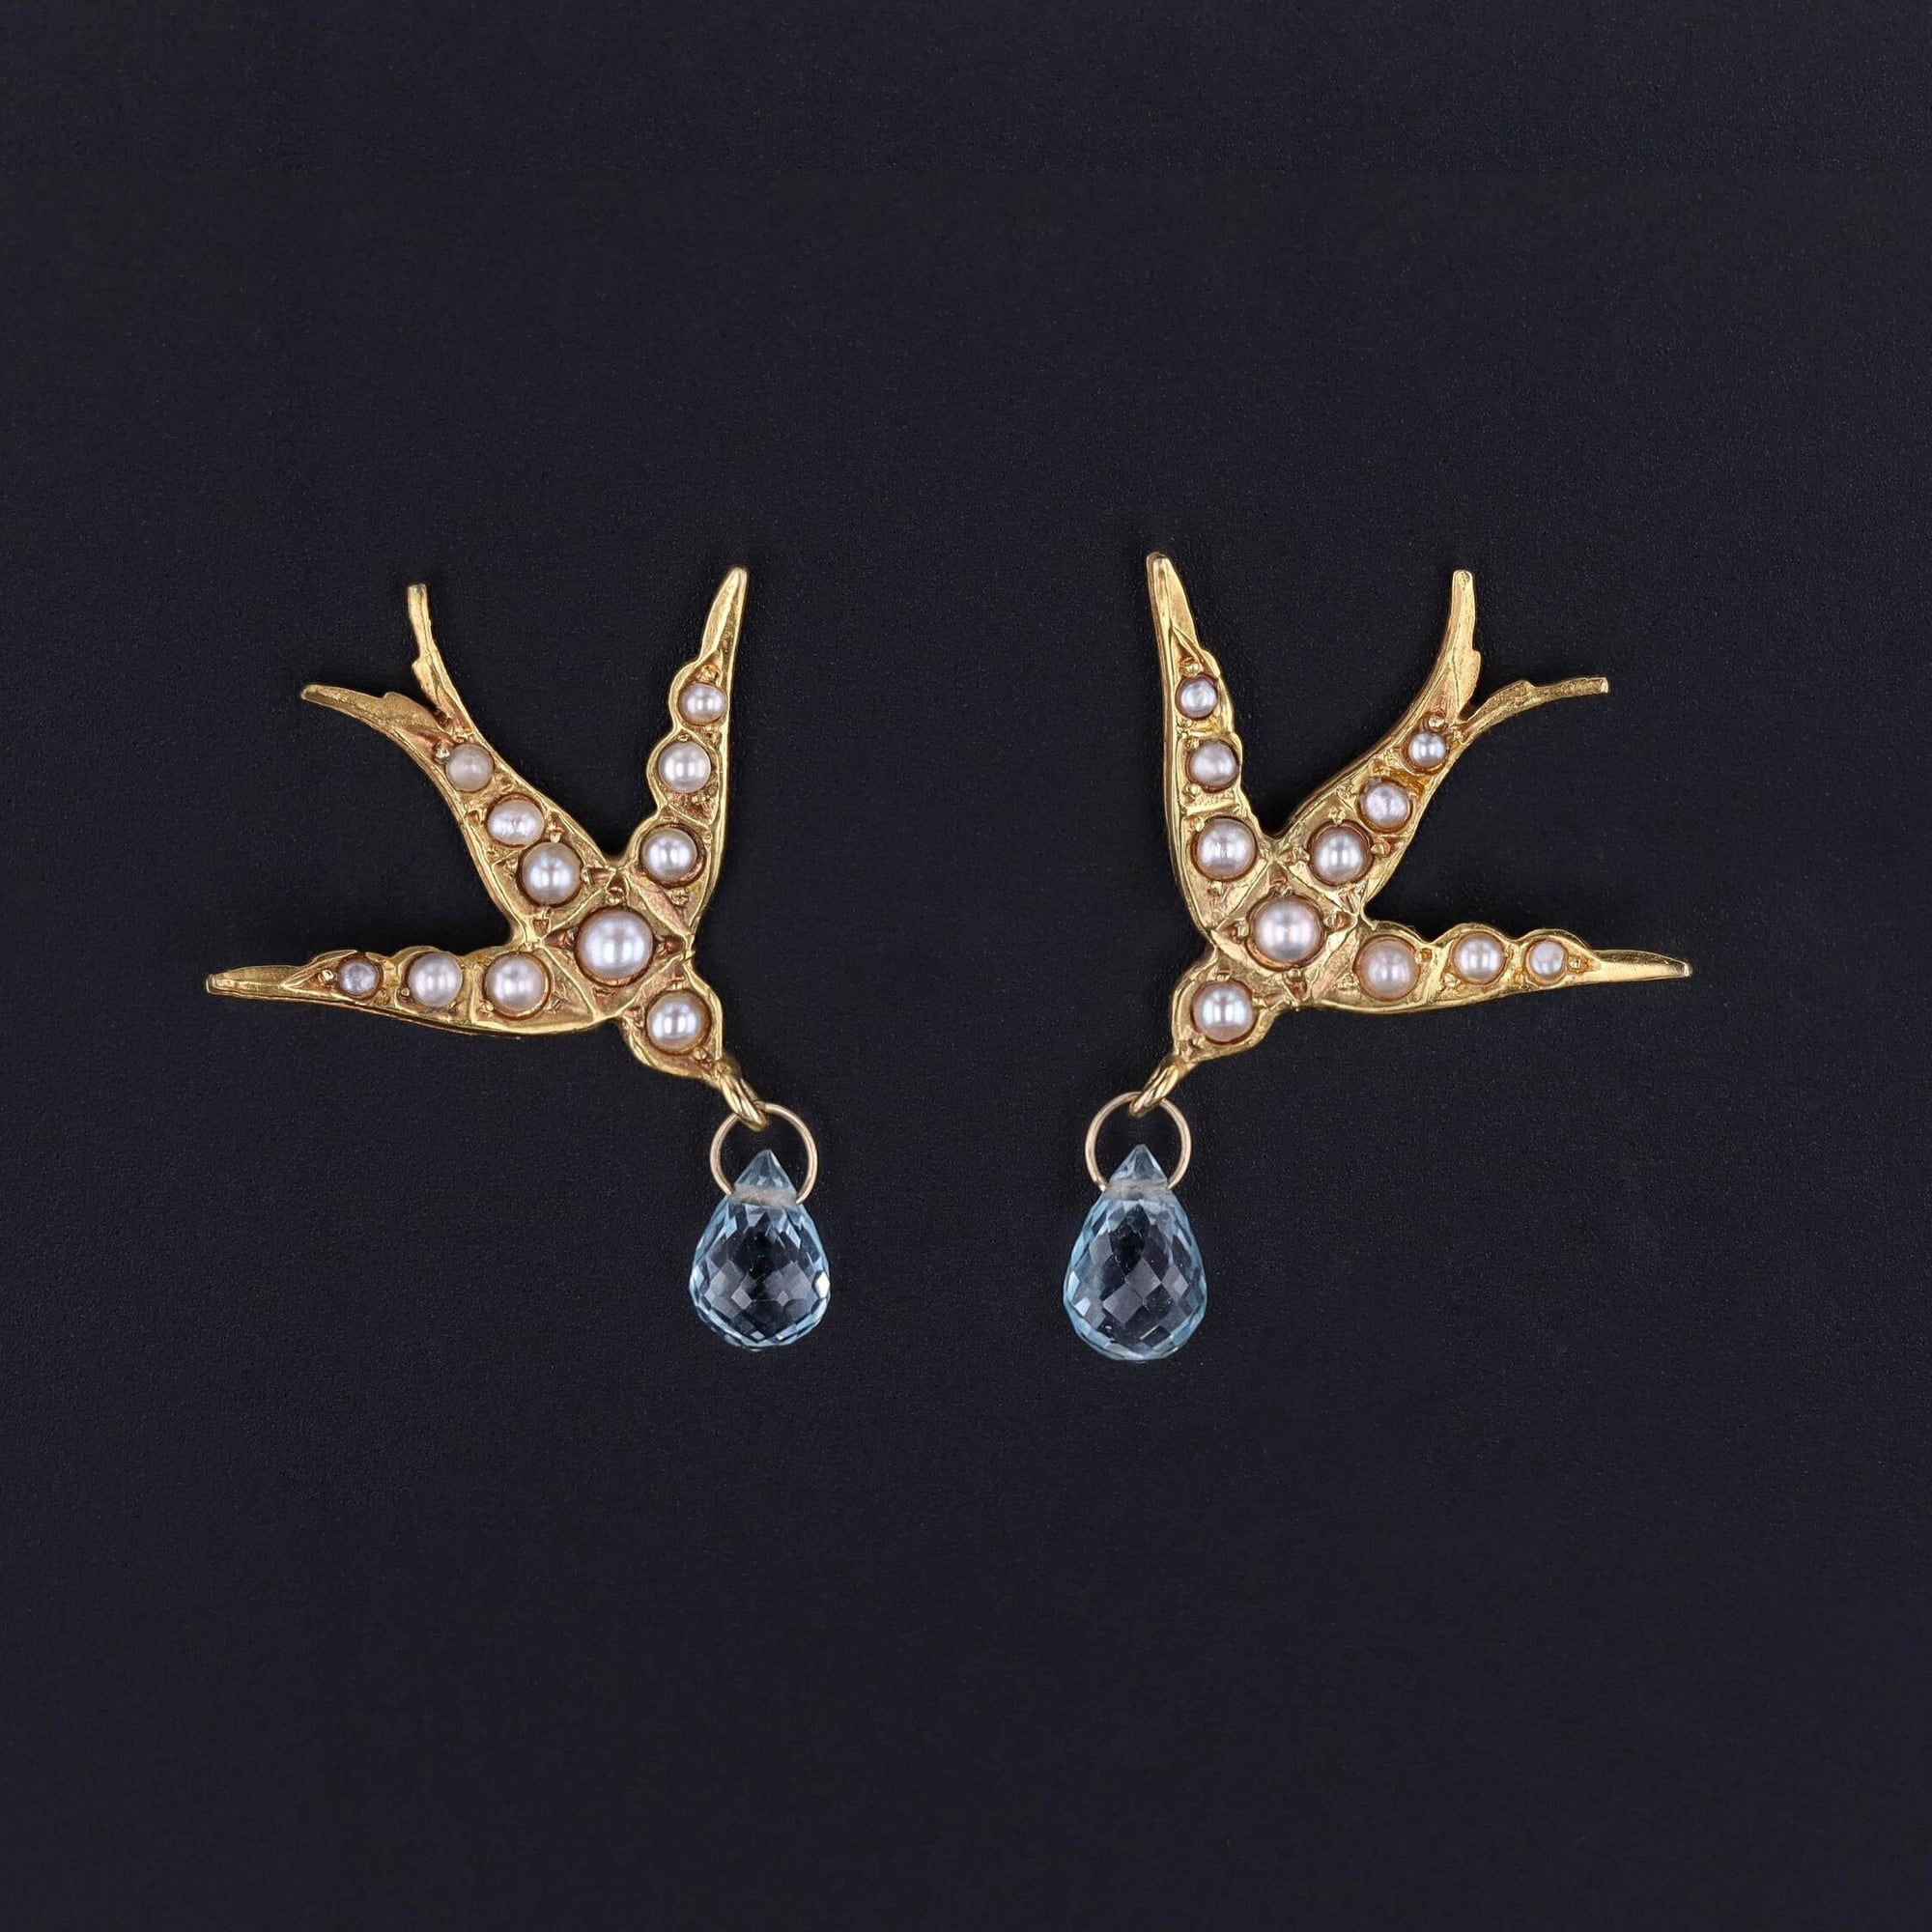 Antique Swallow Conversion Earrings of 14k Gold